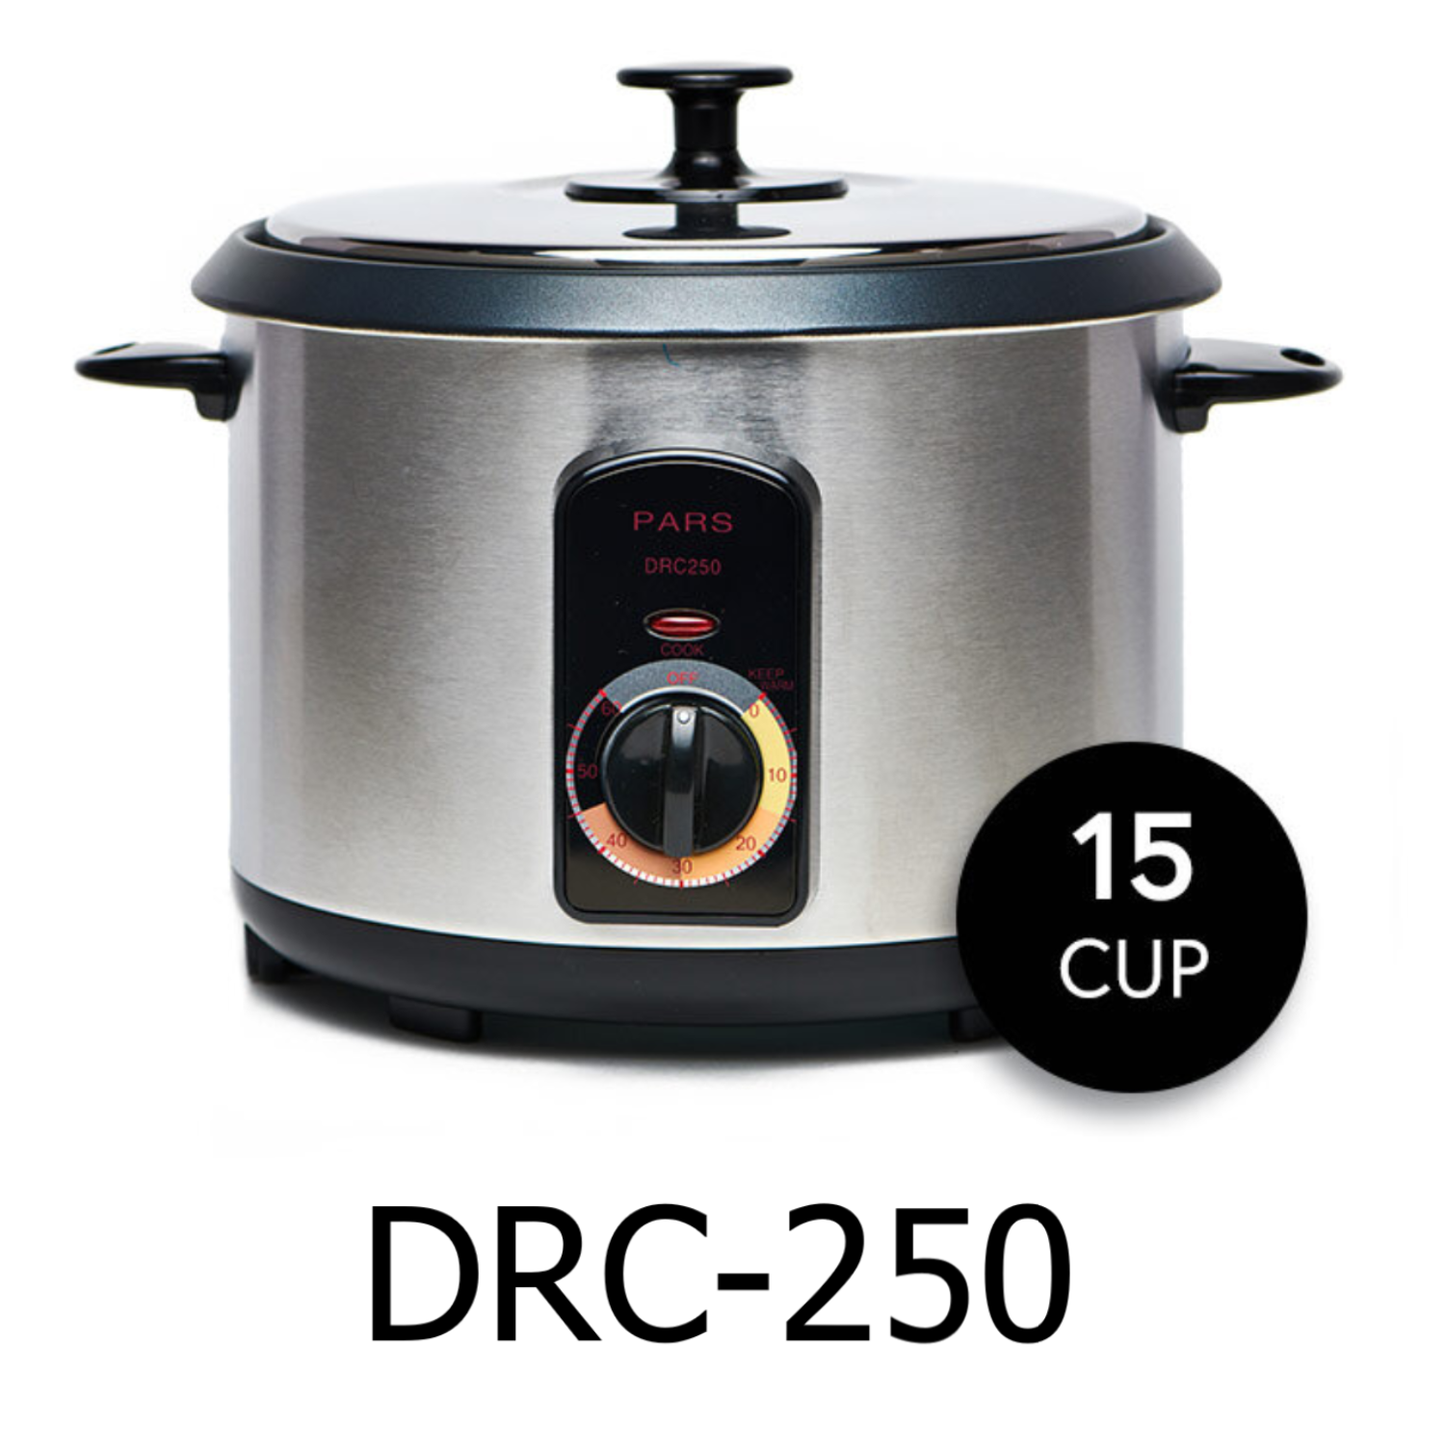 15 Cup Pars Automatic Persian Rice Cooker